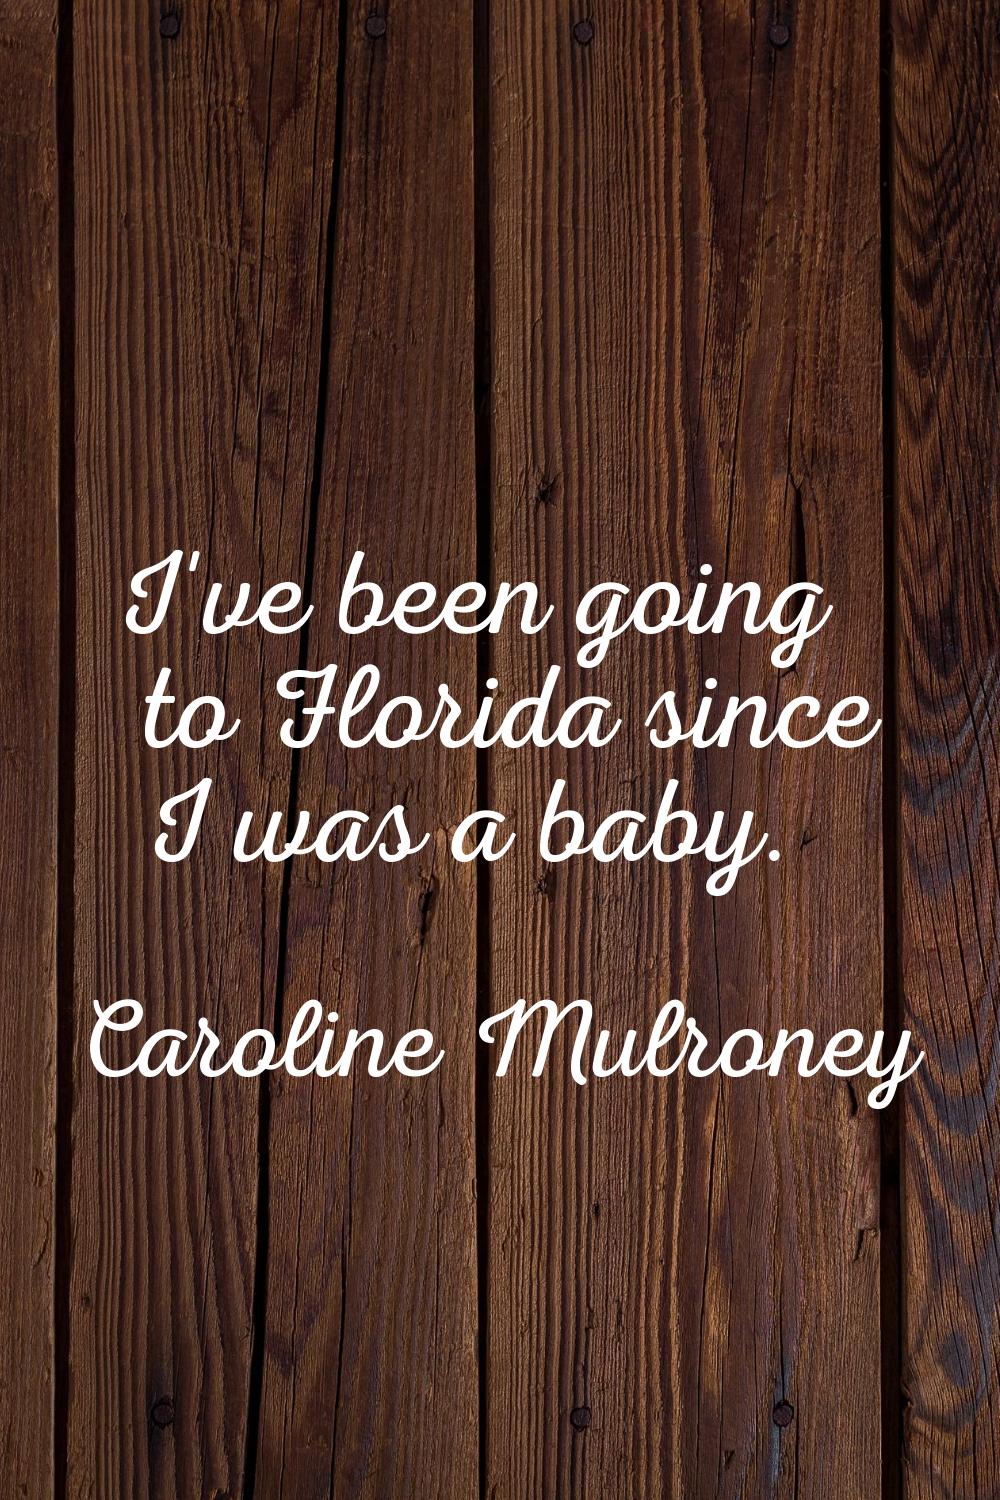 I've been going to Florida since I was a baby.